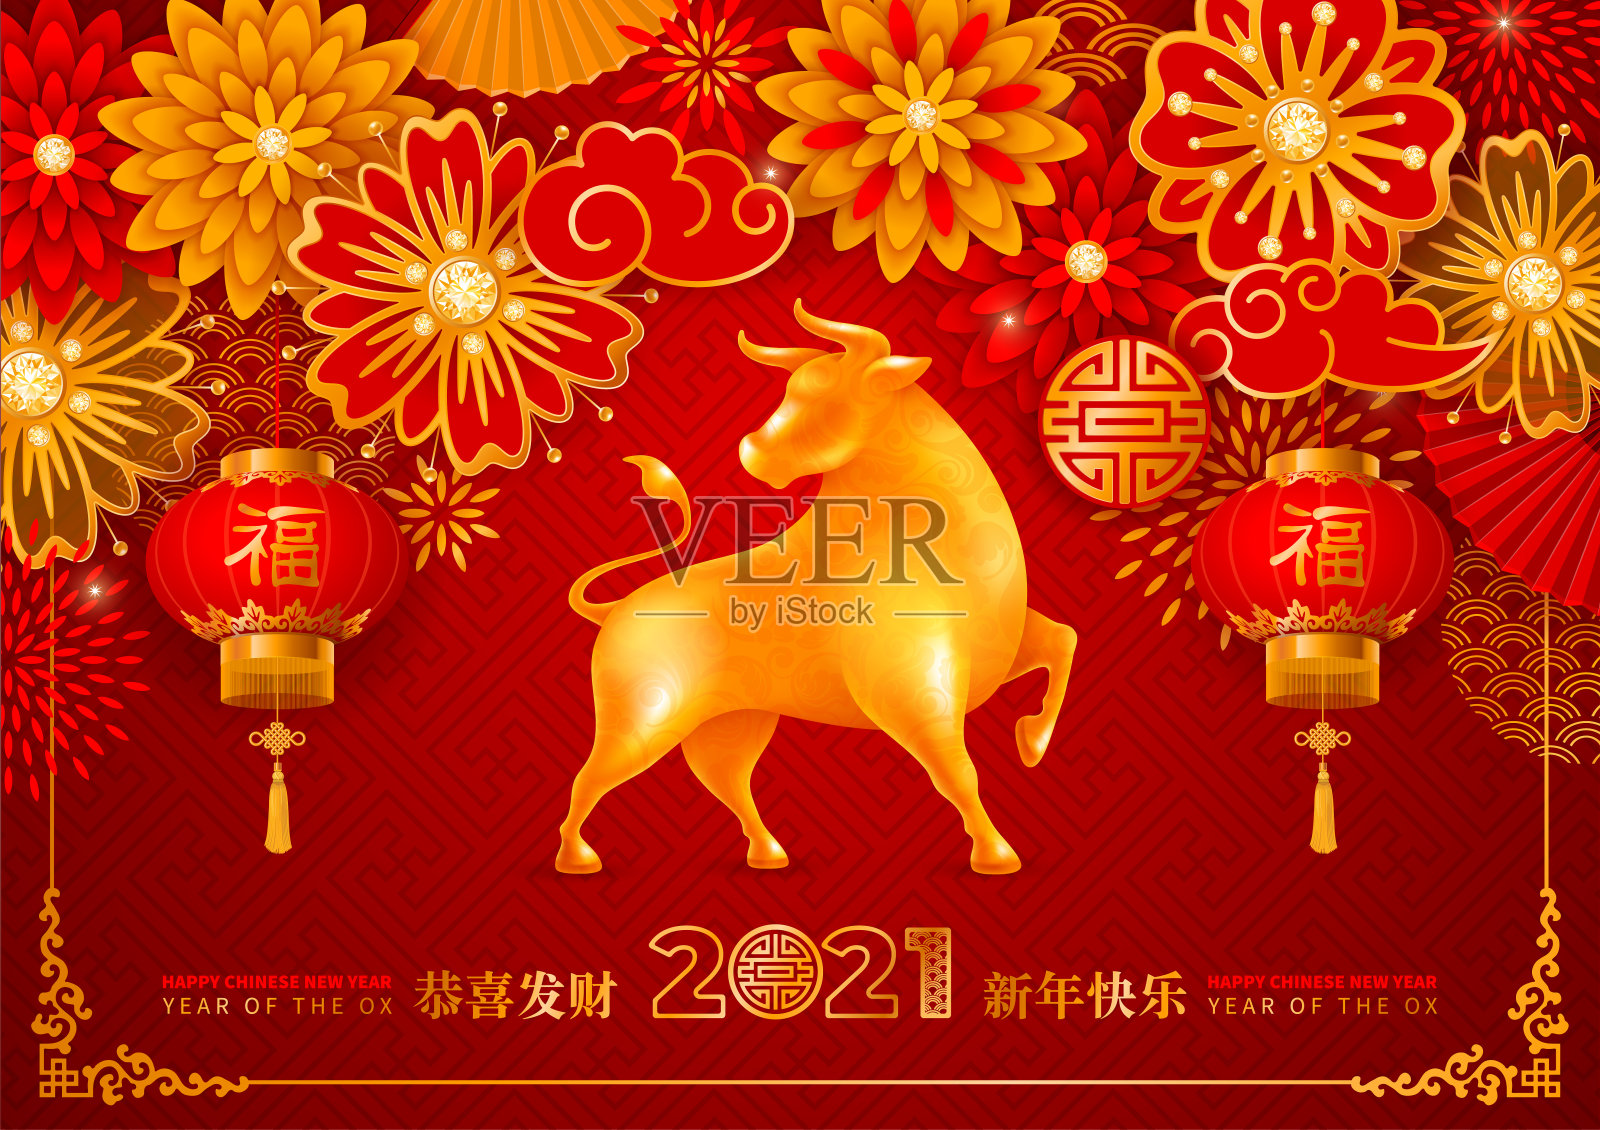 Chinese New Year 2021 Year Of The Ox设计模板素材